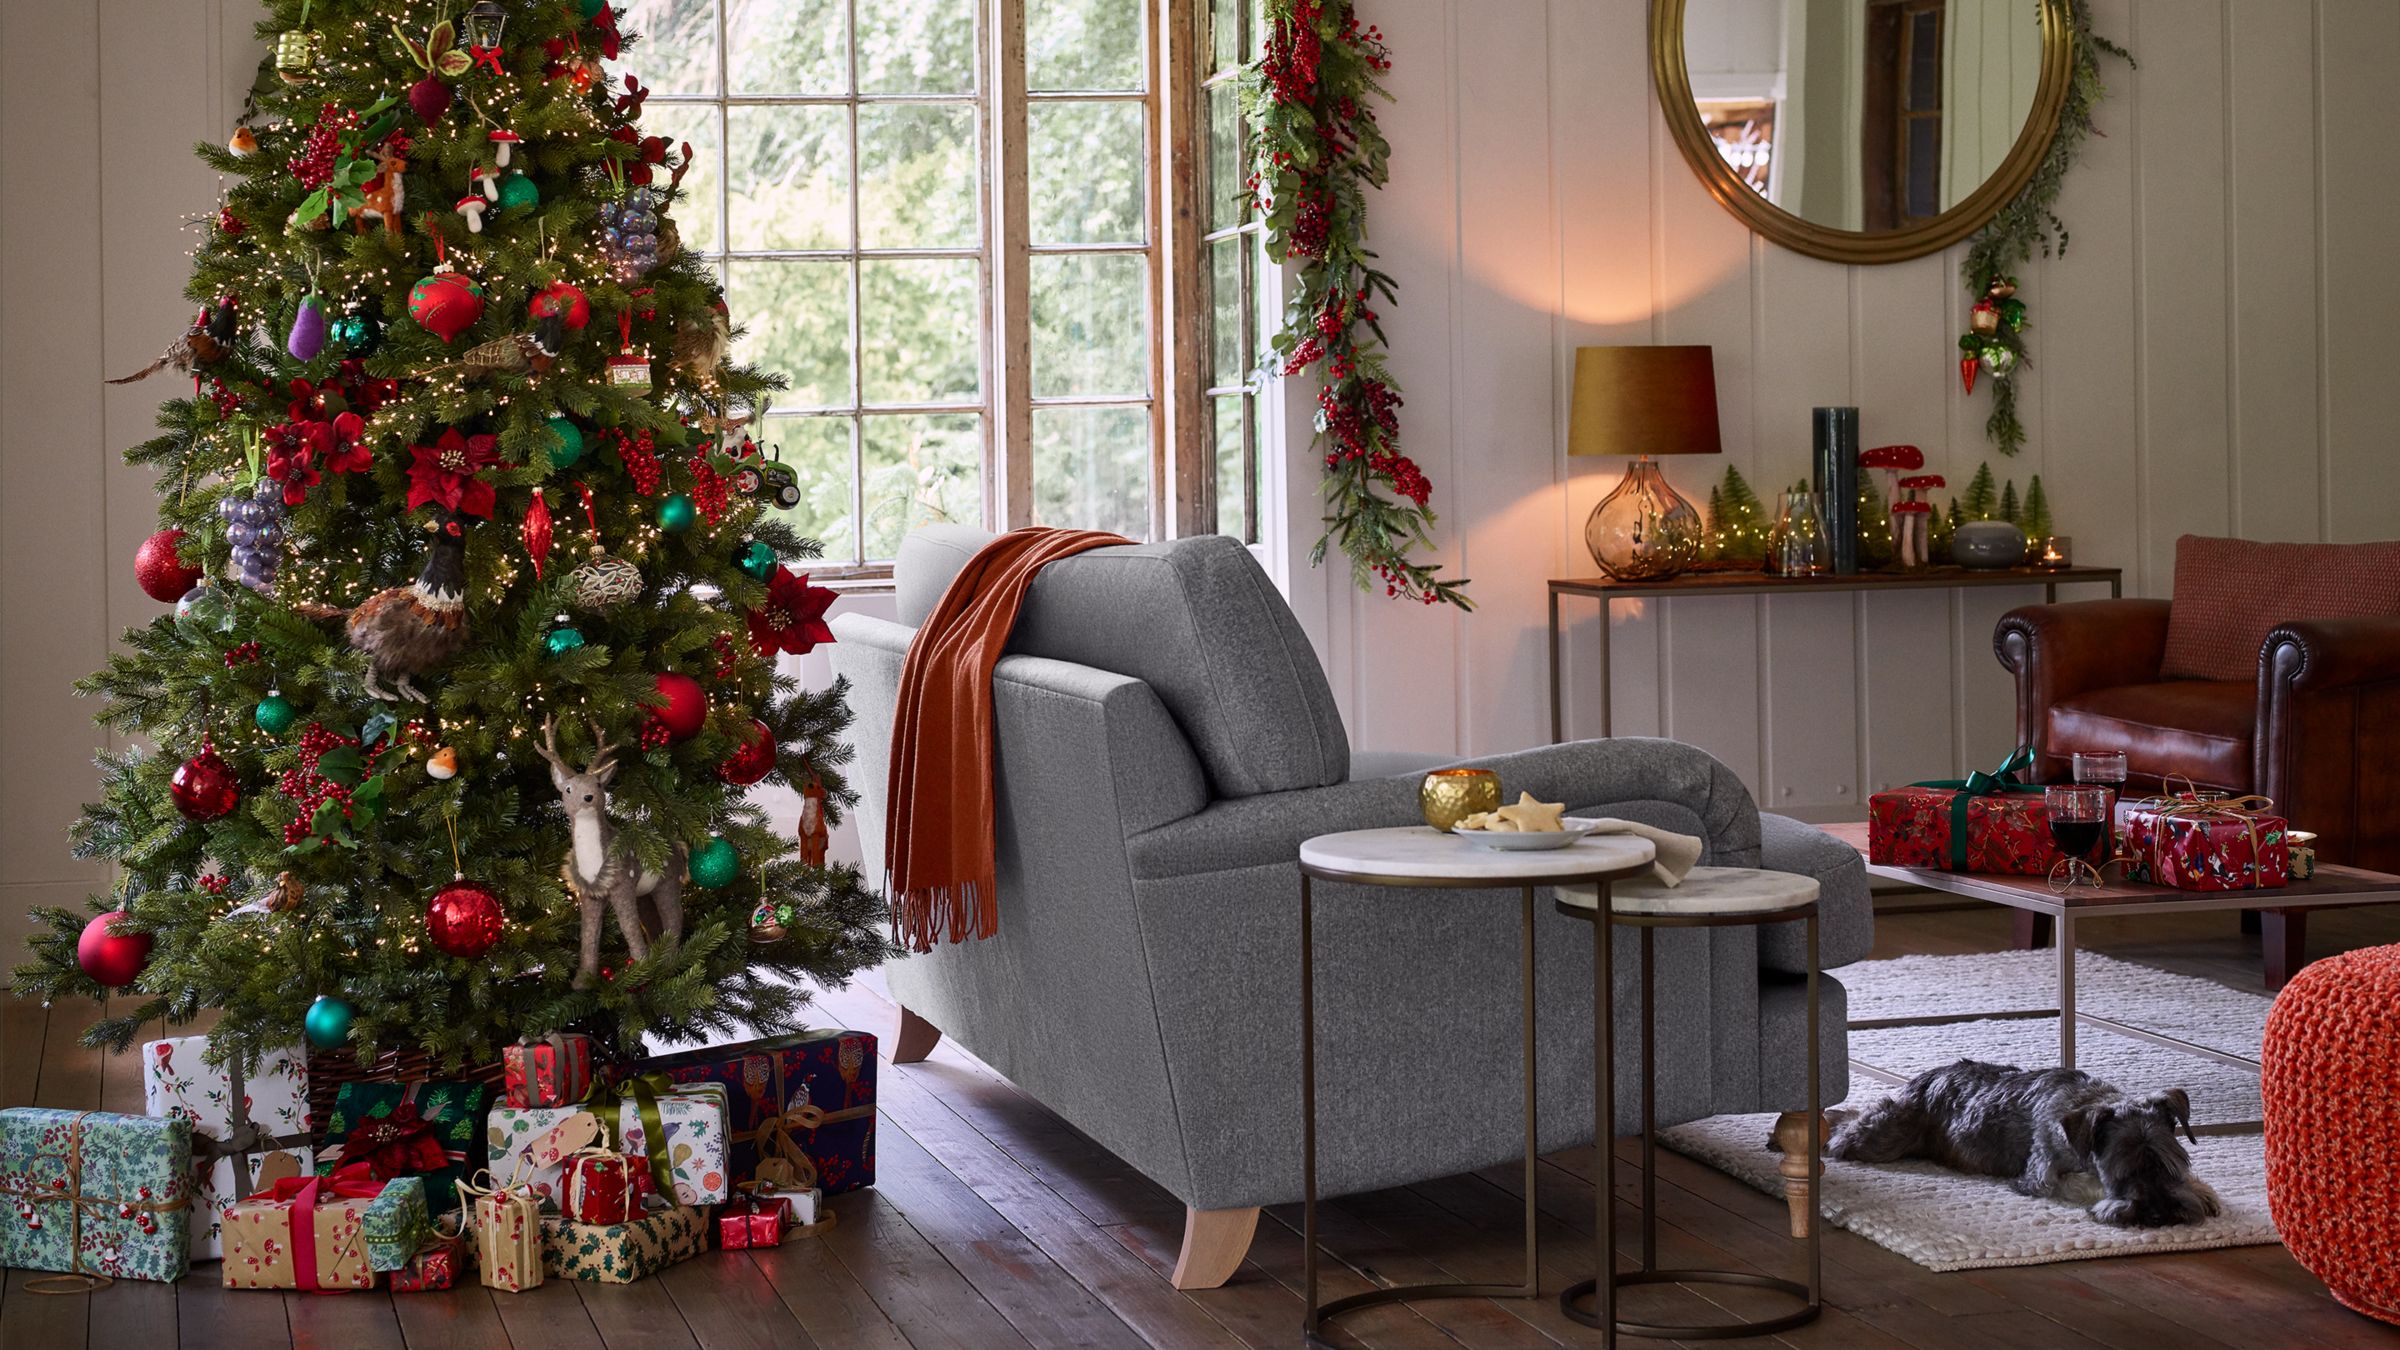 John Lewis & Partners Christams Decorating Ideas and Trends - Festive Fields